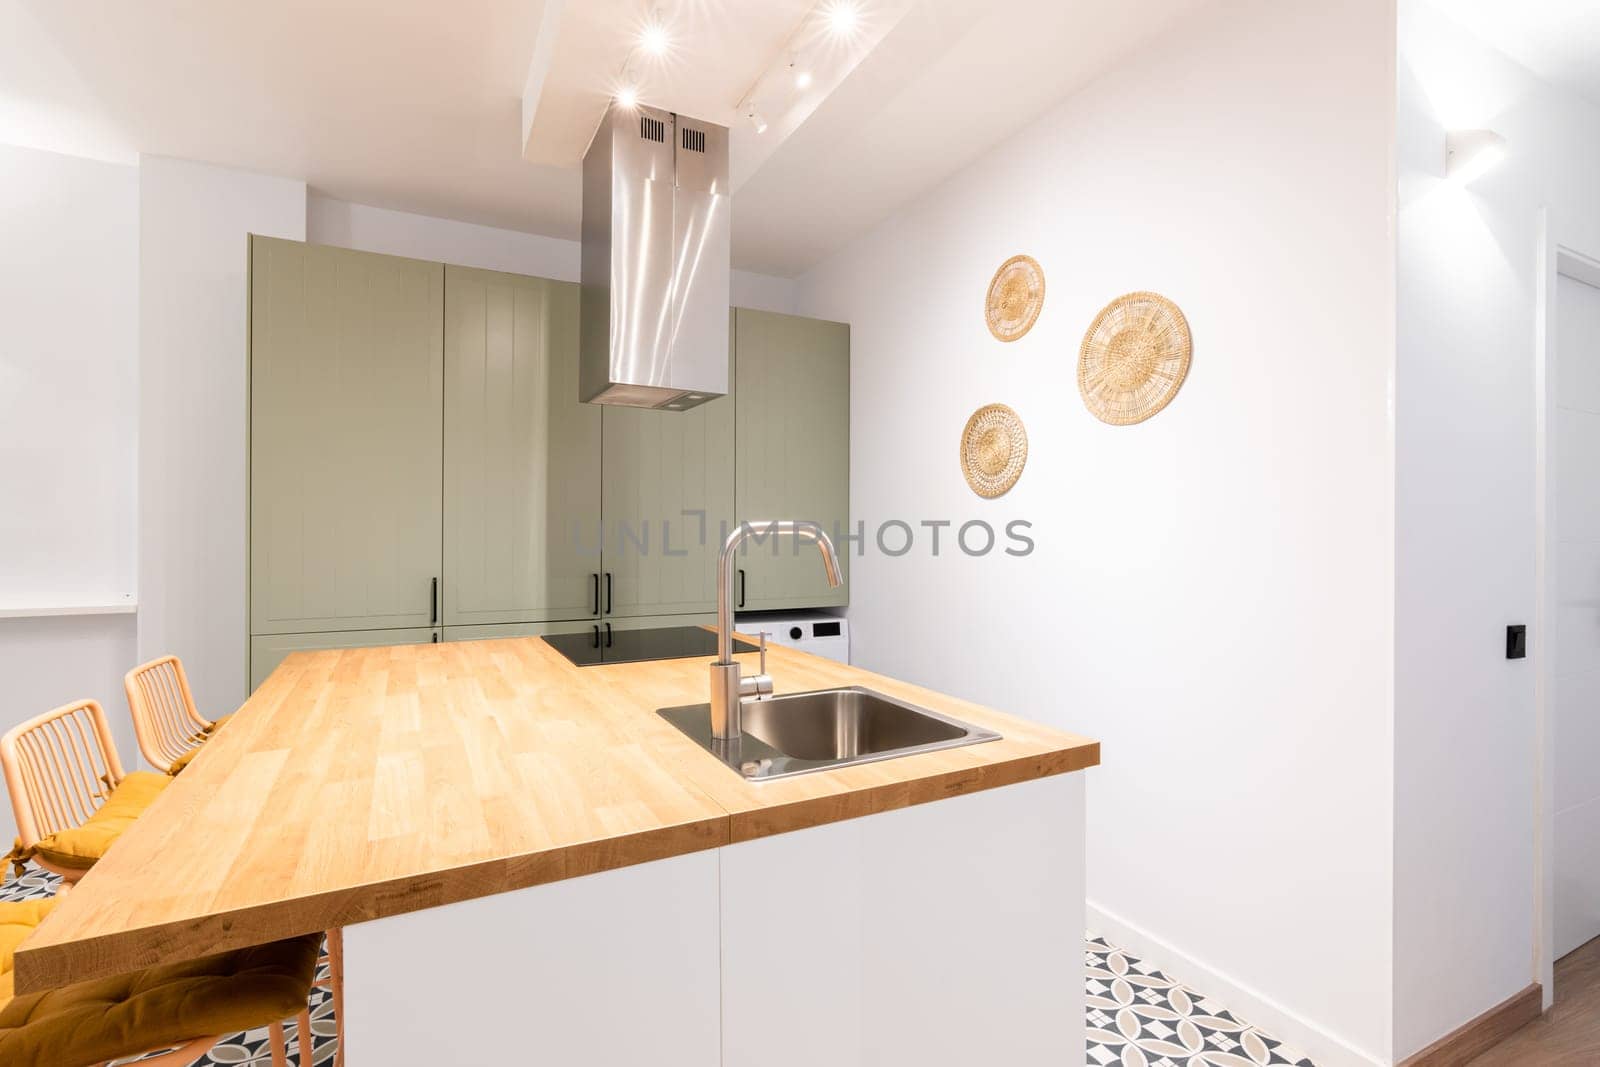 Designer kitchen with bright lighting from wall lamps. Table with sink and faucet in chromed metal. Above the electric stove, system for purifying the air from odors during cooking. by apavlin